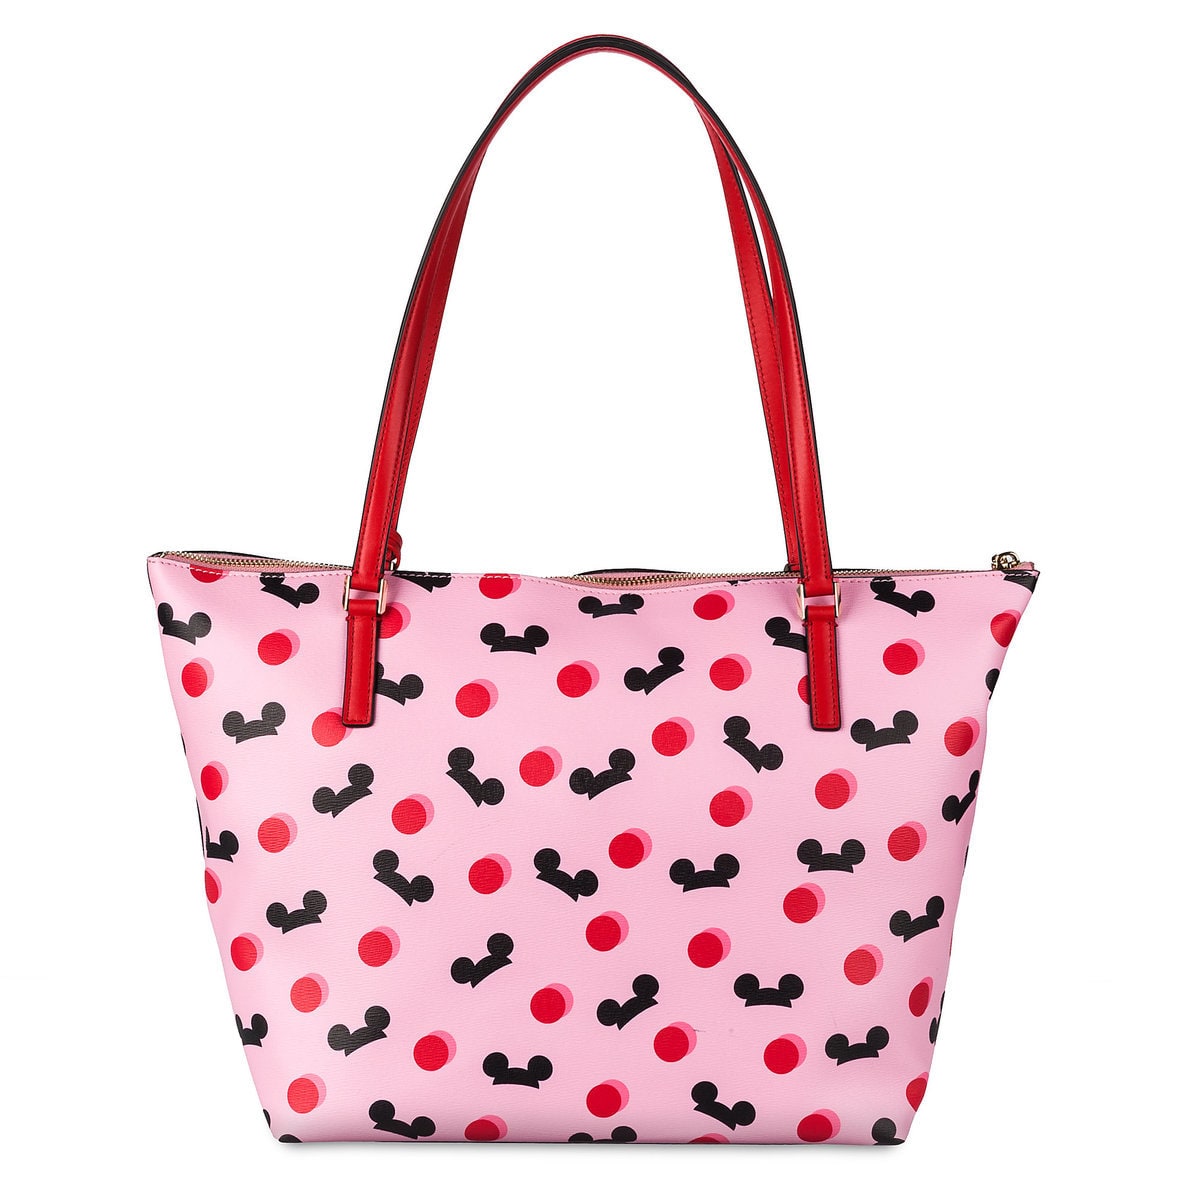 Disney Mickey Mouse Ear Hat Tote Pink by Kate Spade New York New with Tag